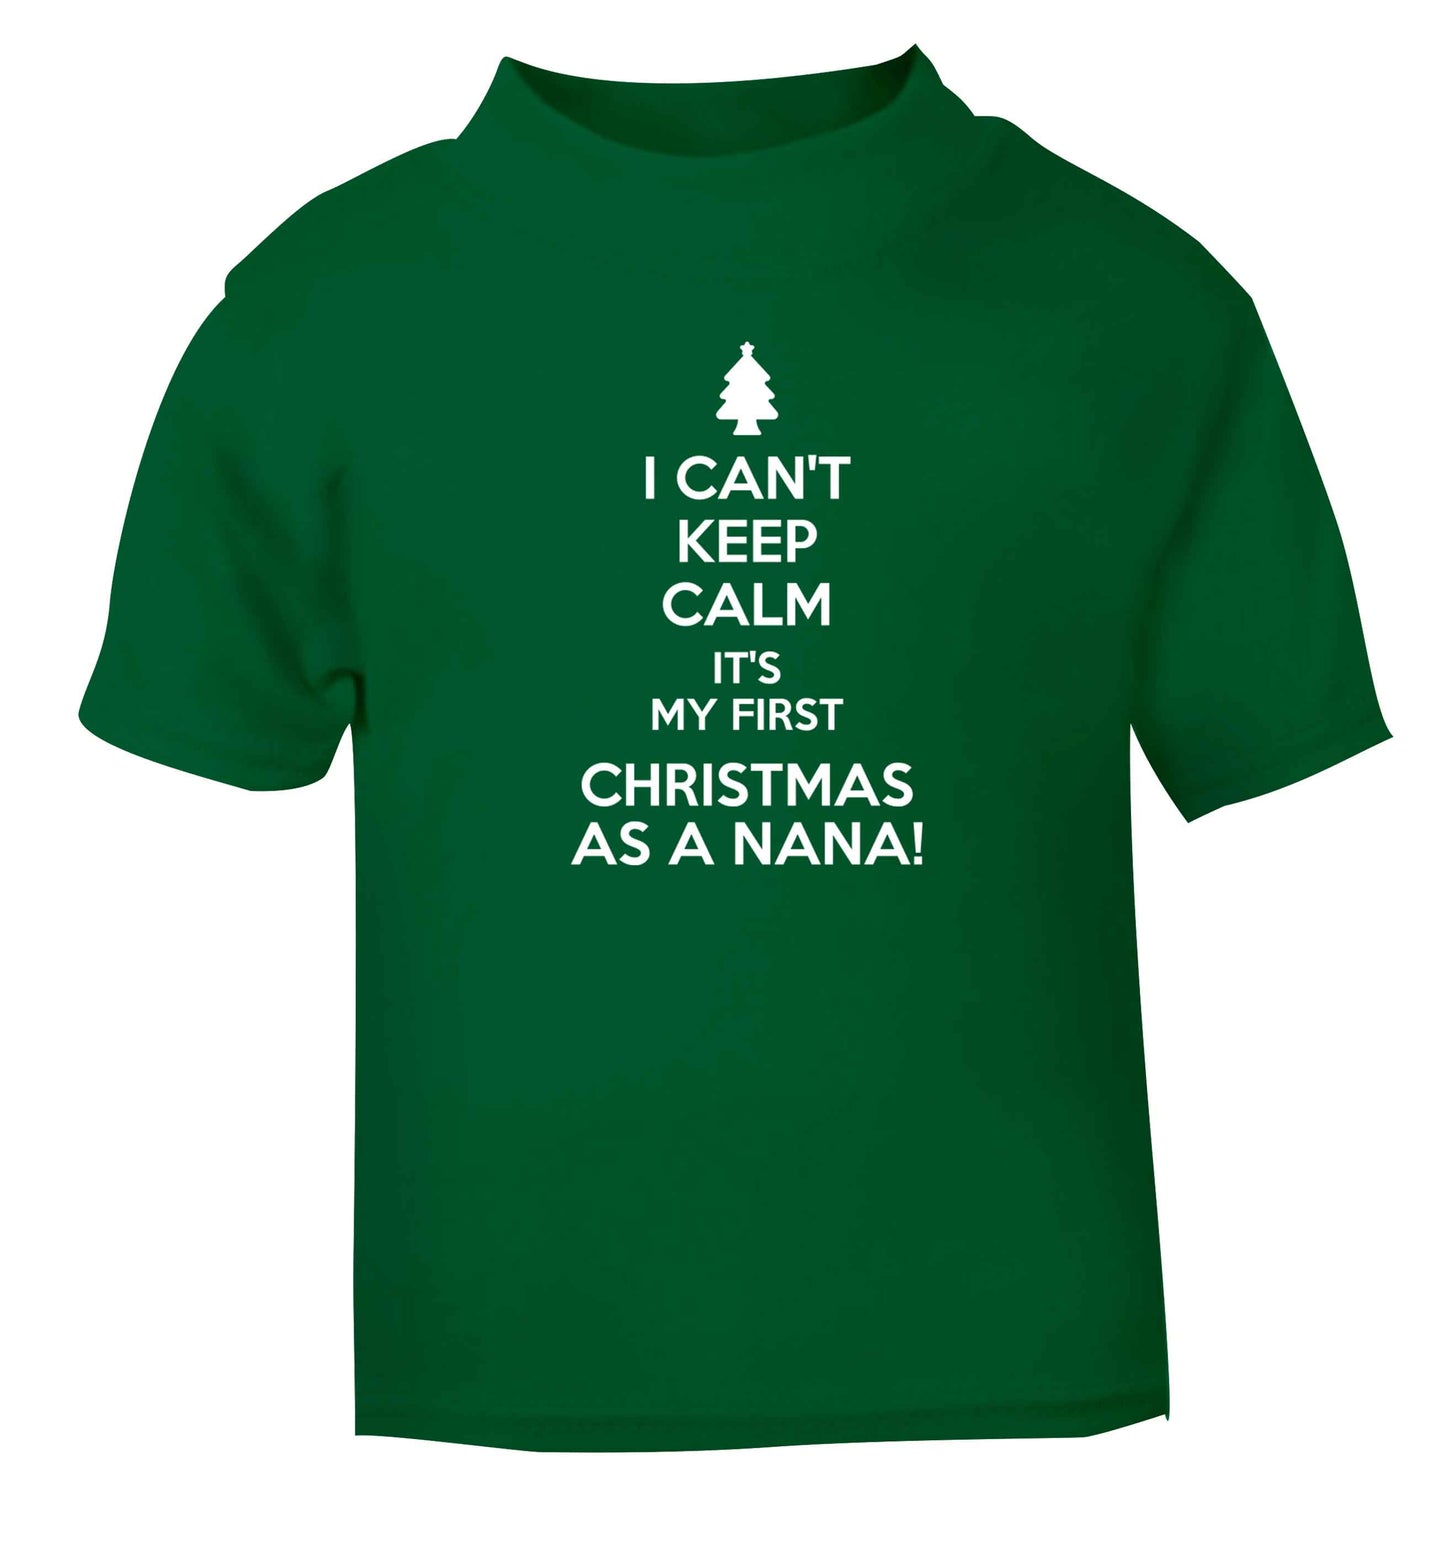 I can't keep calm it's my first Christmas as a nana! green Baby Toddler Tshirt 2 Years